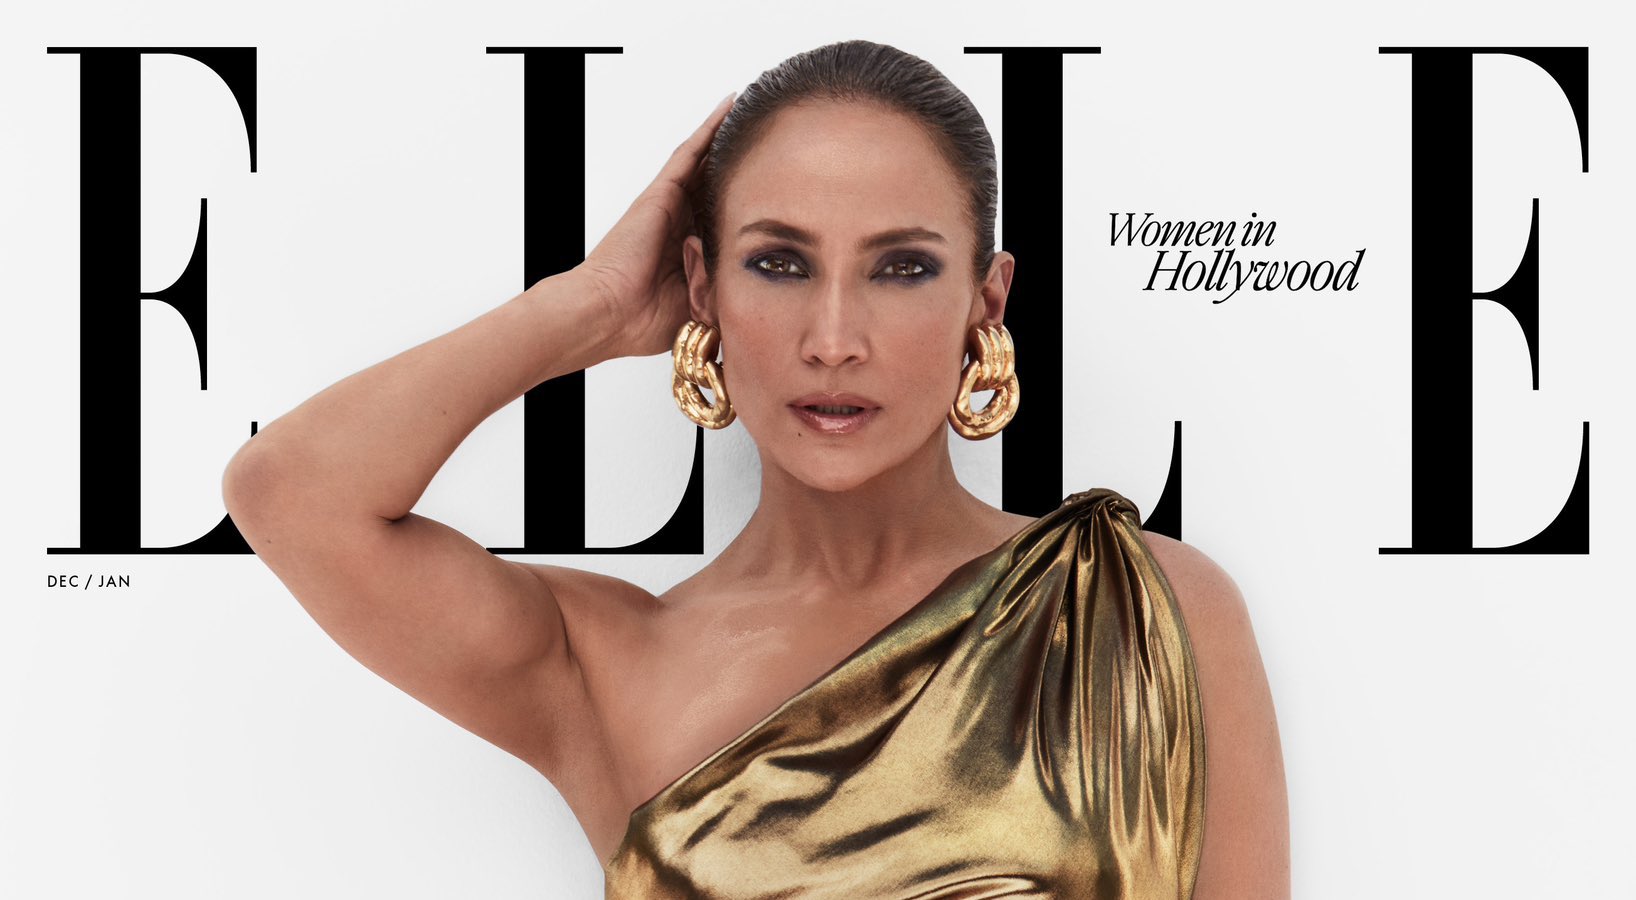 Jennifer Lopez Glows in Gold for ELLE / Says: “Women Get Sexier” With Age